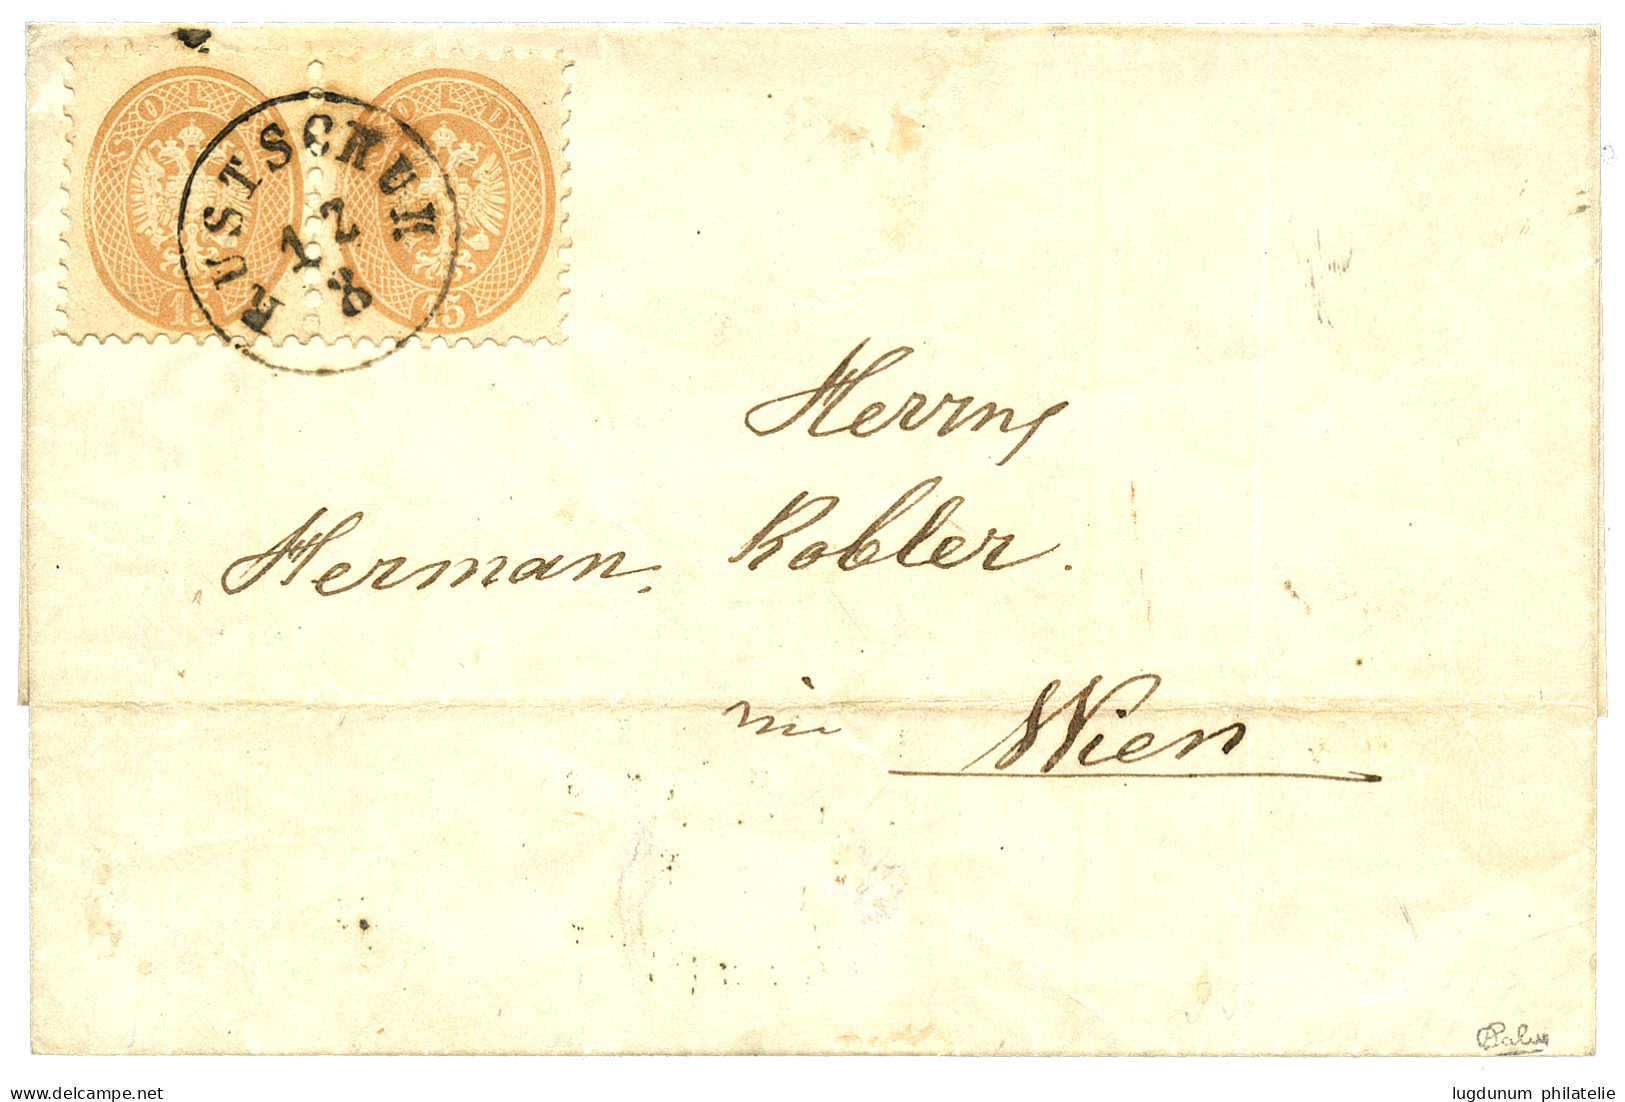 RUSTSCHUK : 1865 Pair 15 Soldi Canc. RUSTSHUK On Cover To WIEN. Signed CALVES. Superb. - Eastern Austria